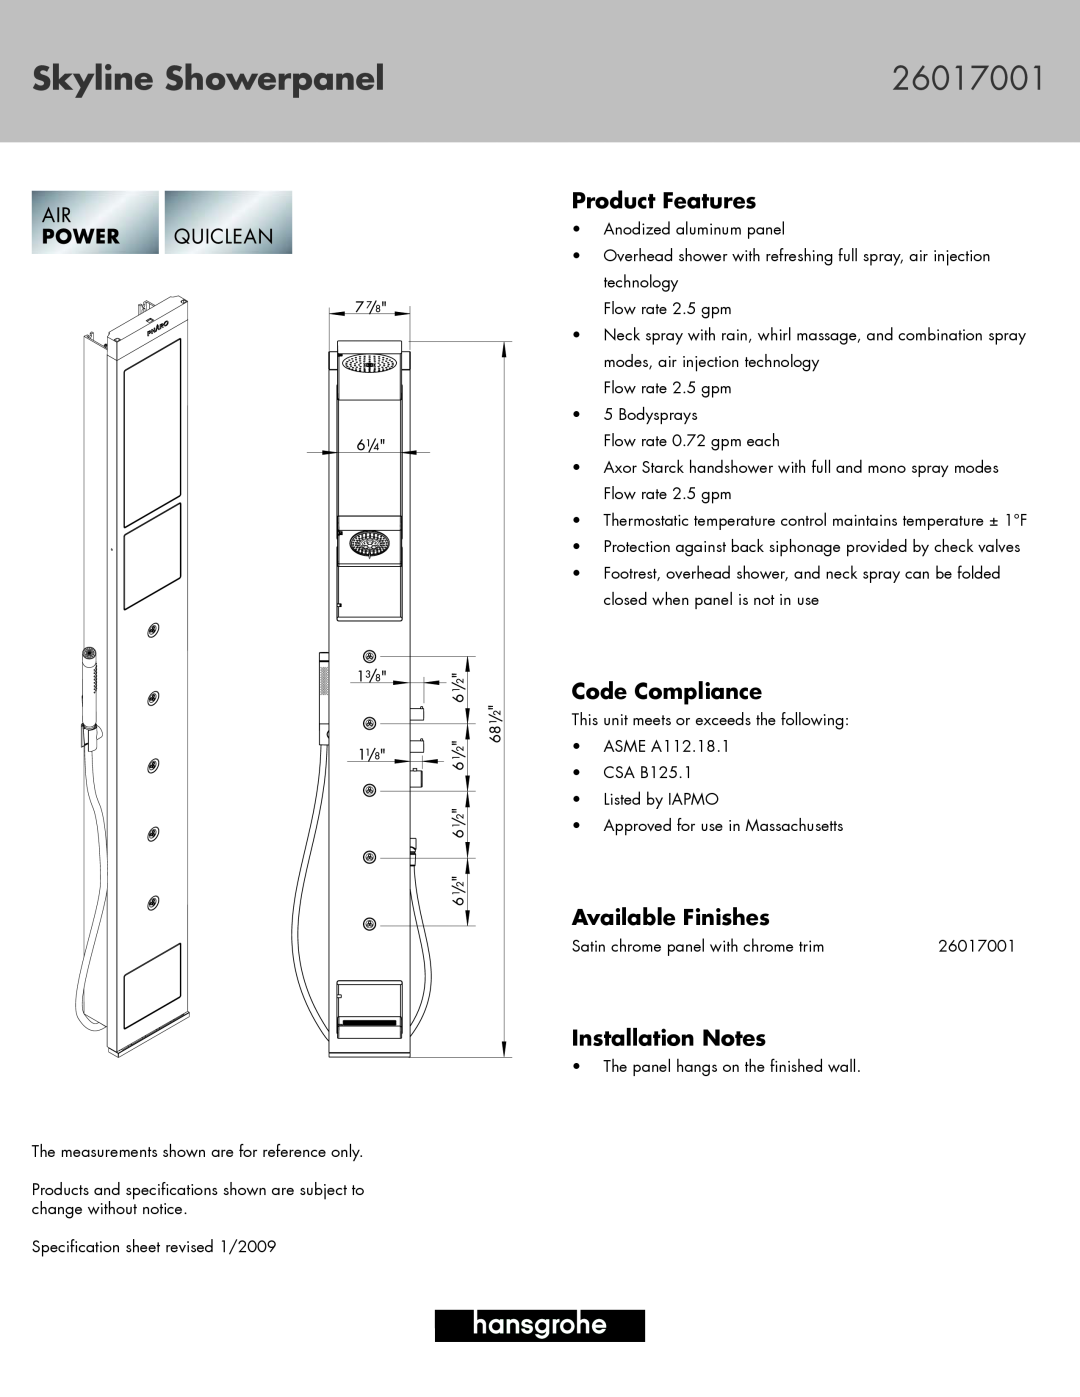 Axor 26017001 specifications Skyline Showerpanel, Product Features, Code Compliance, Available Finishes 